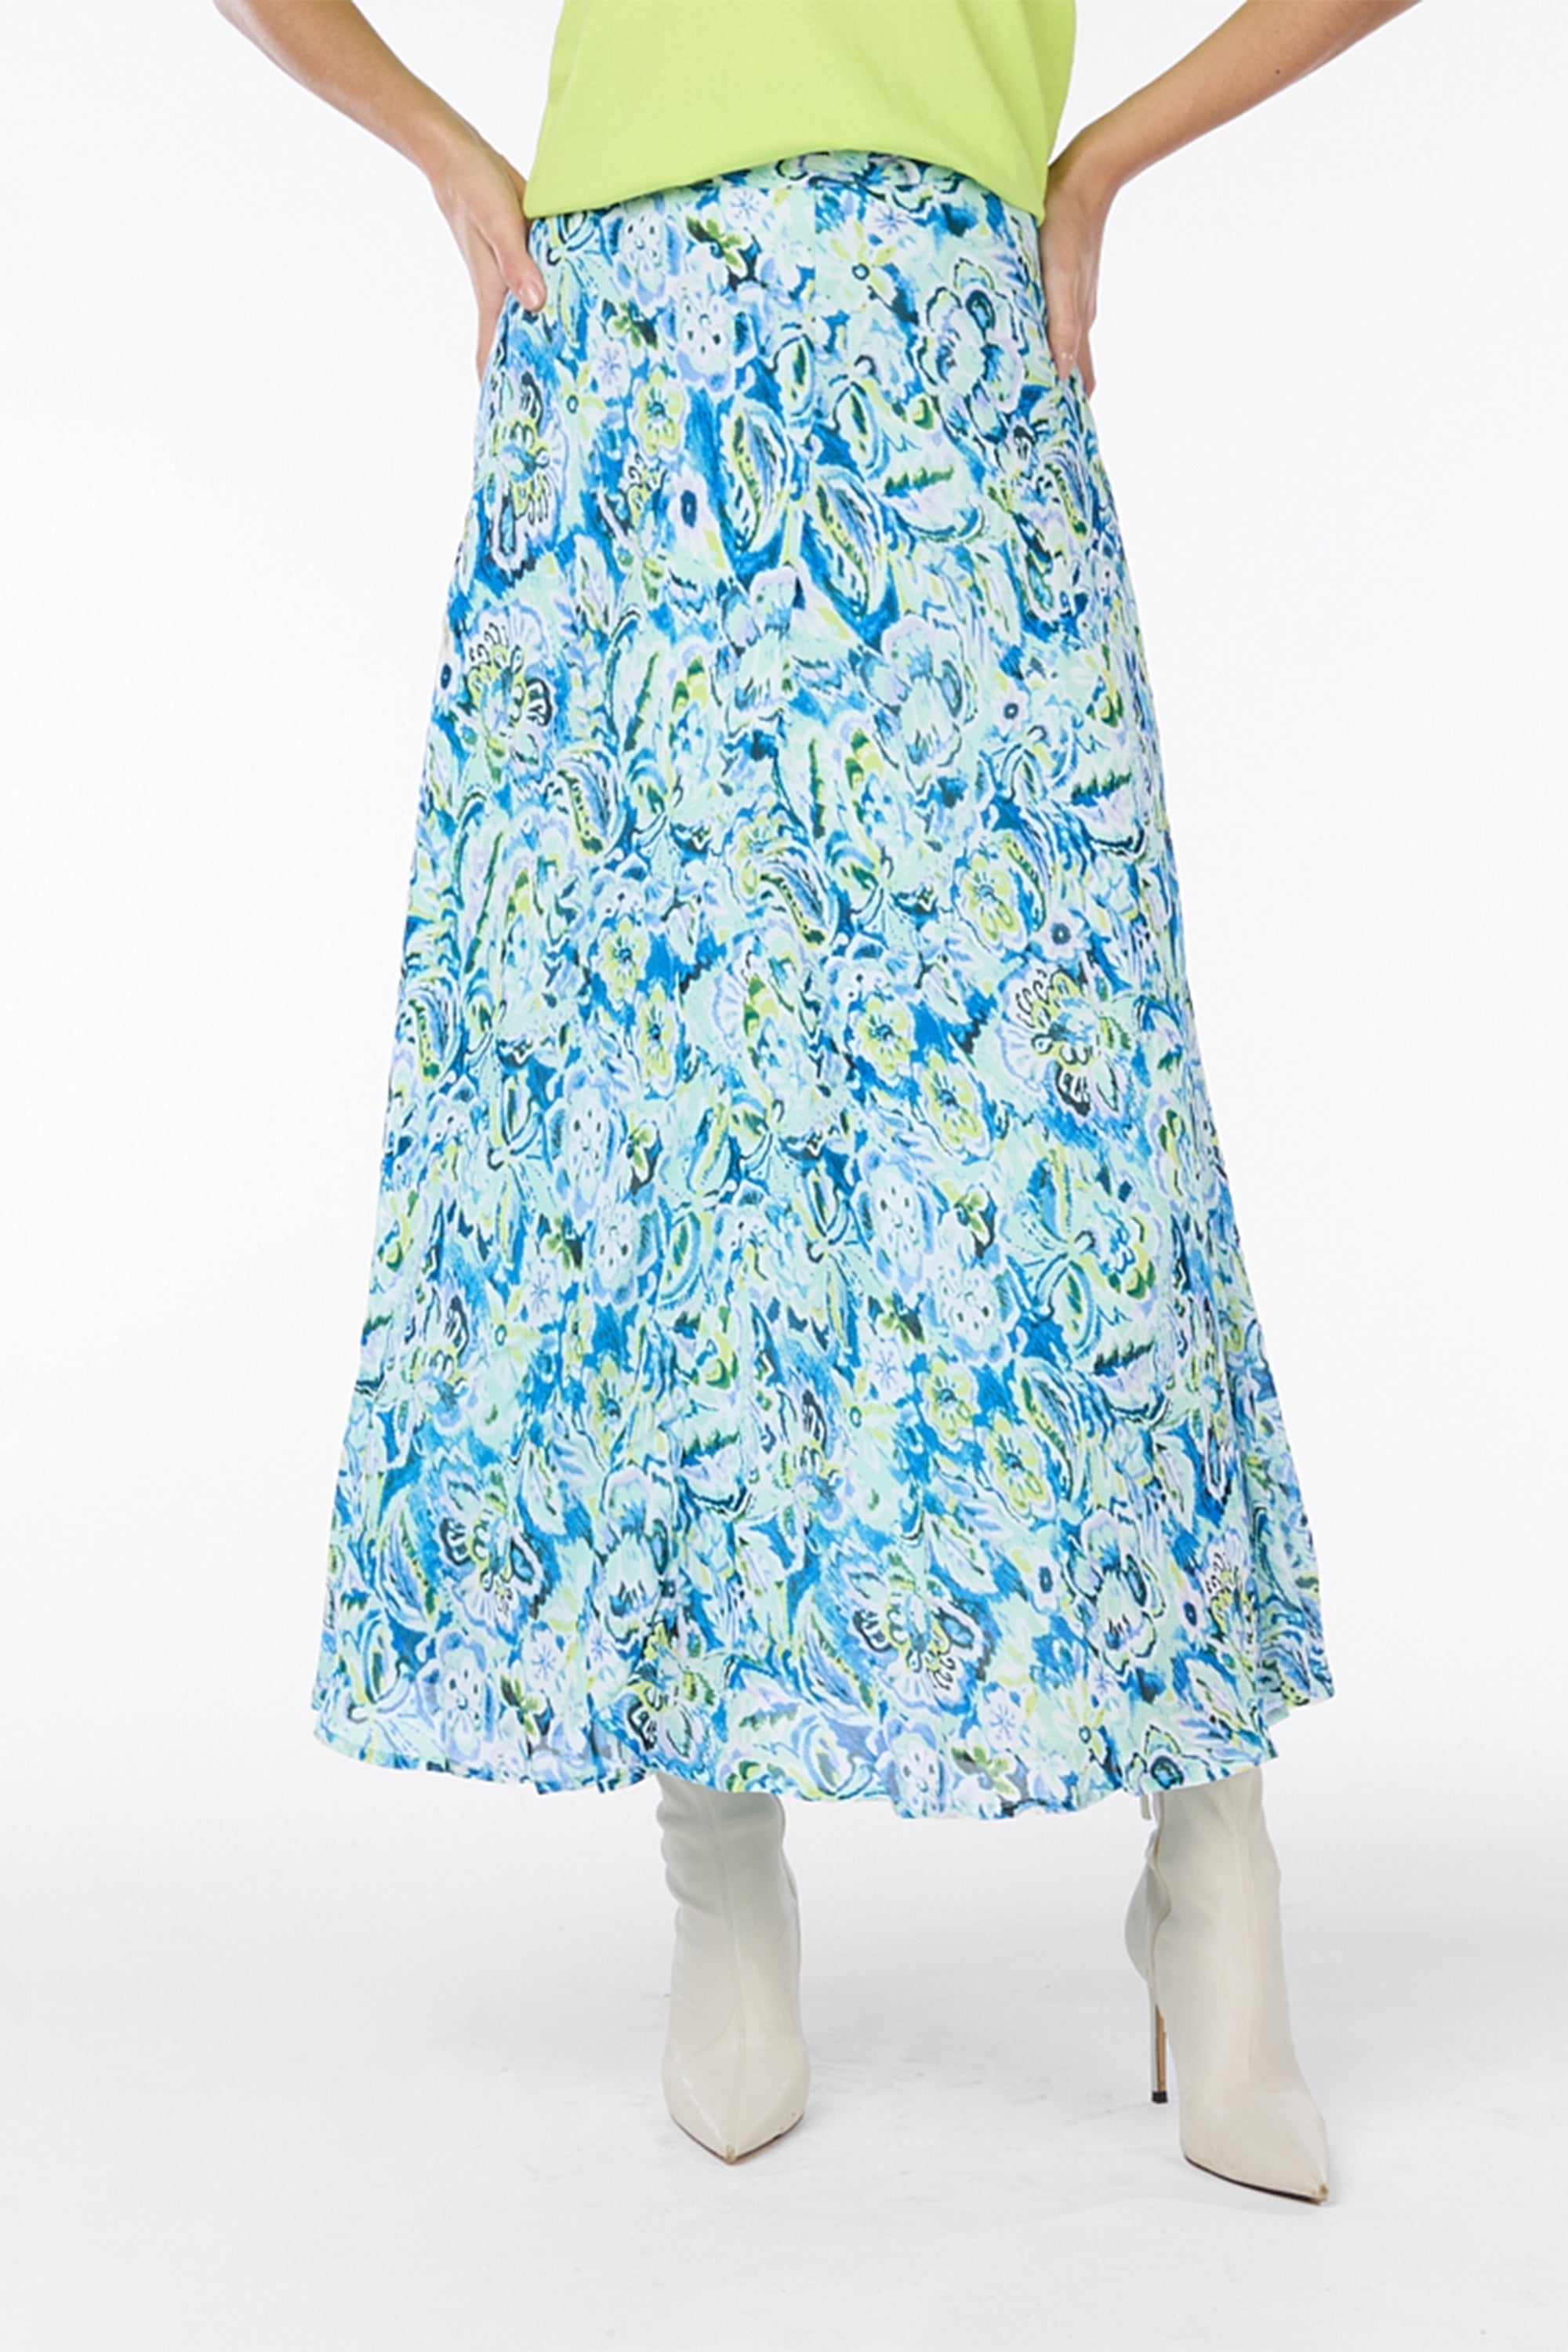 Front view of Esqulao (sp2415008) Blue Floral Chiffon skirt